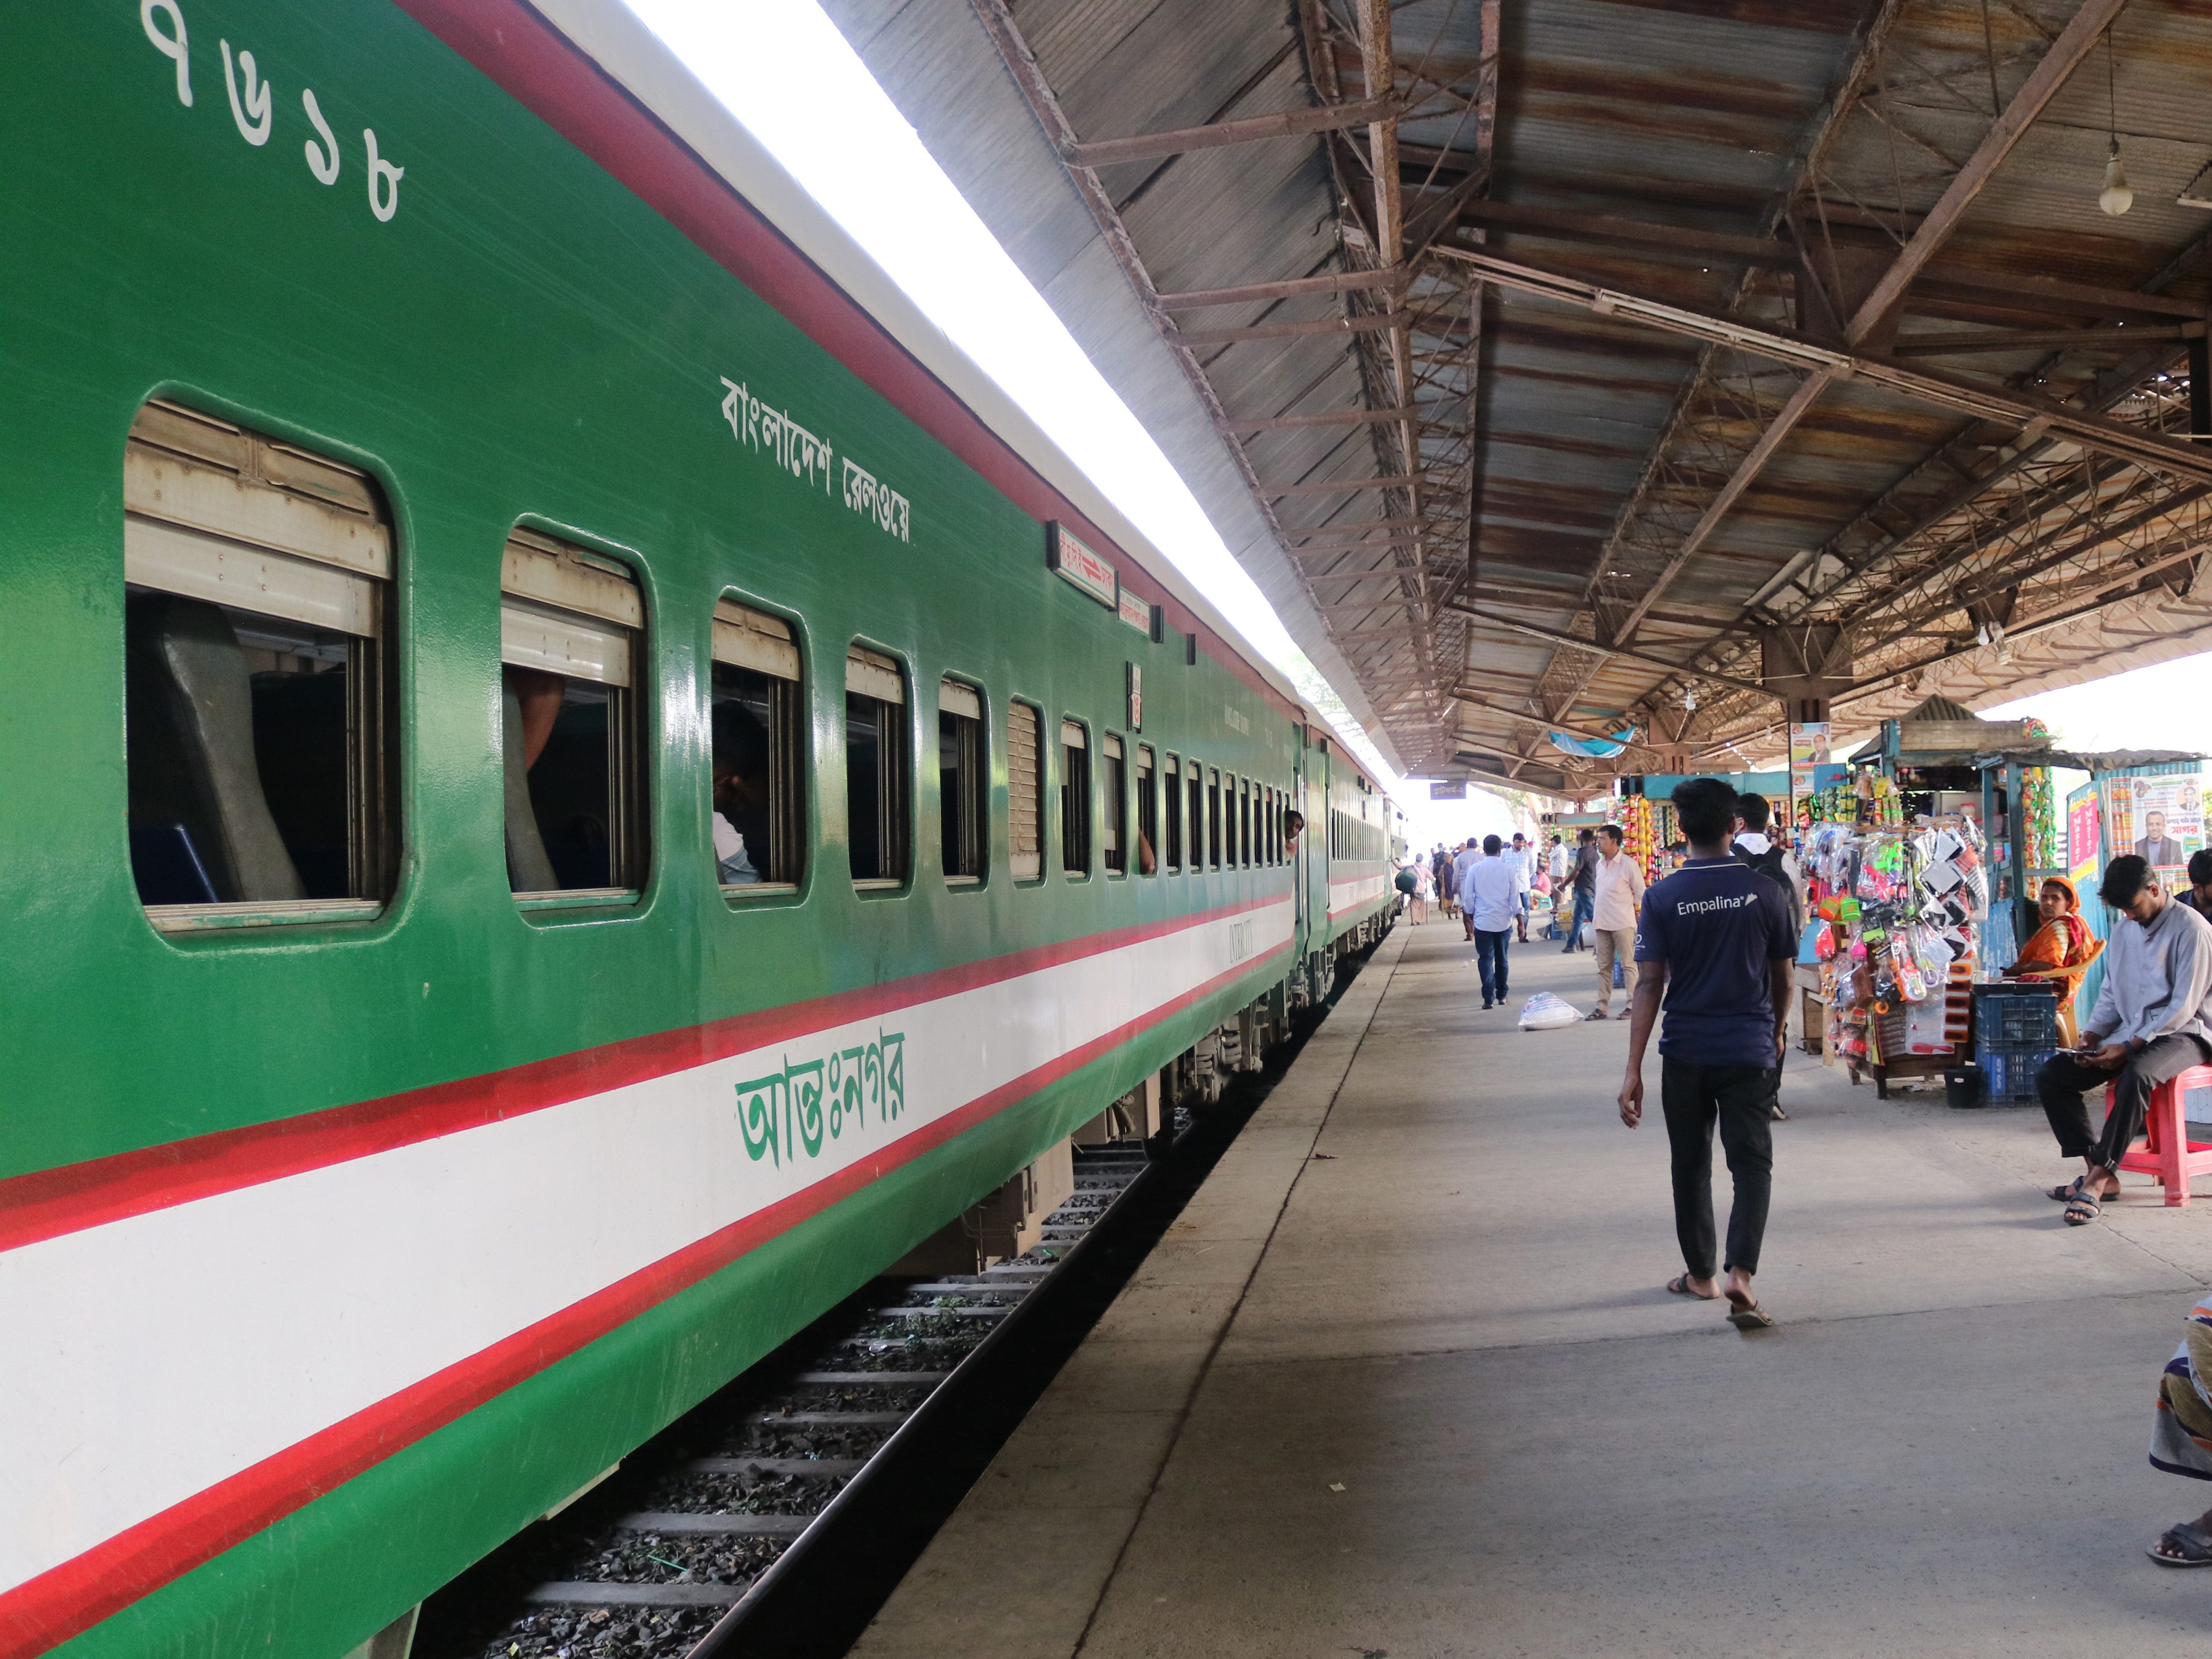 I rode the longest train route in Bangladesh for $10, and the 12 ½-hour journey was surprisingly scenic